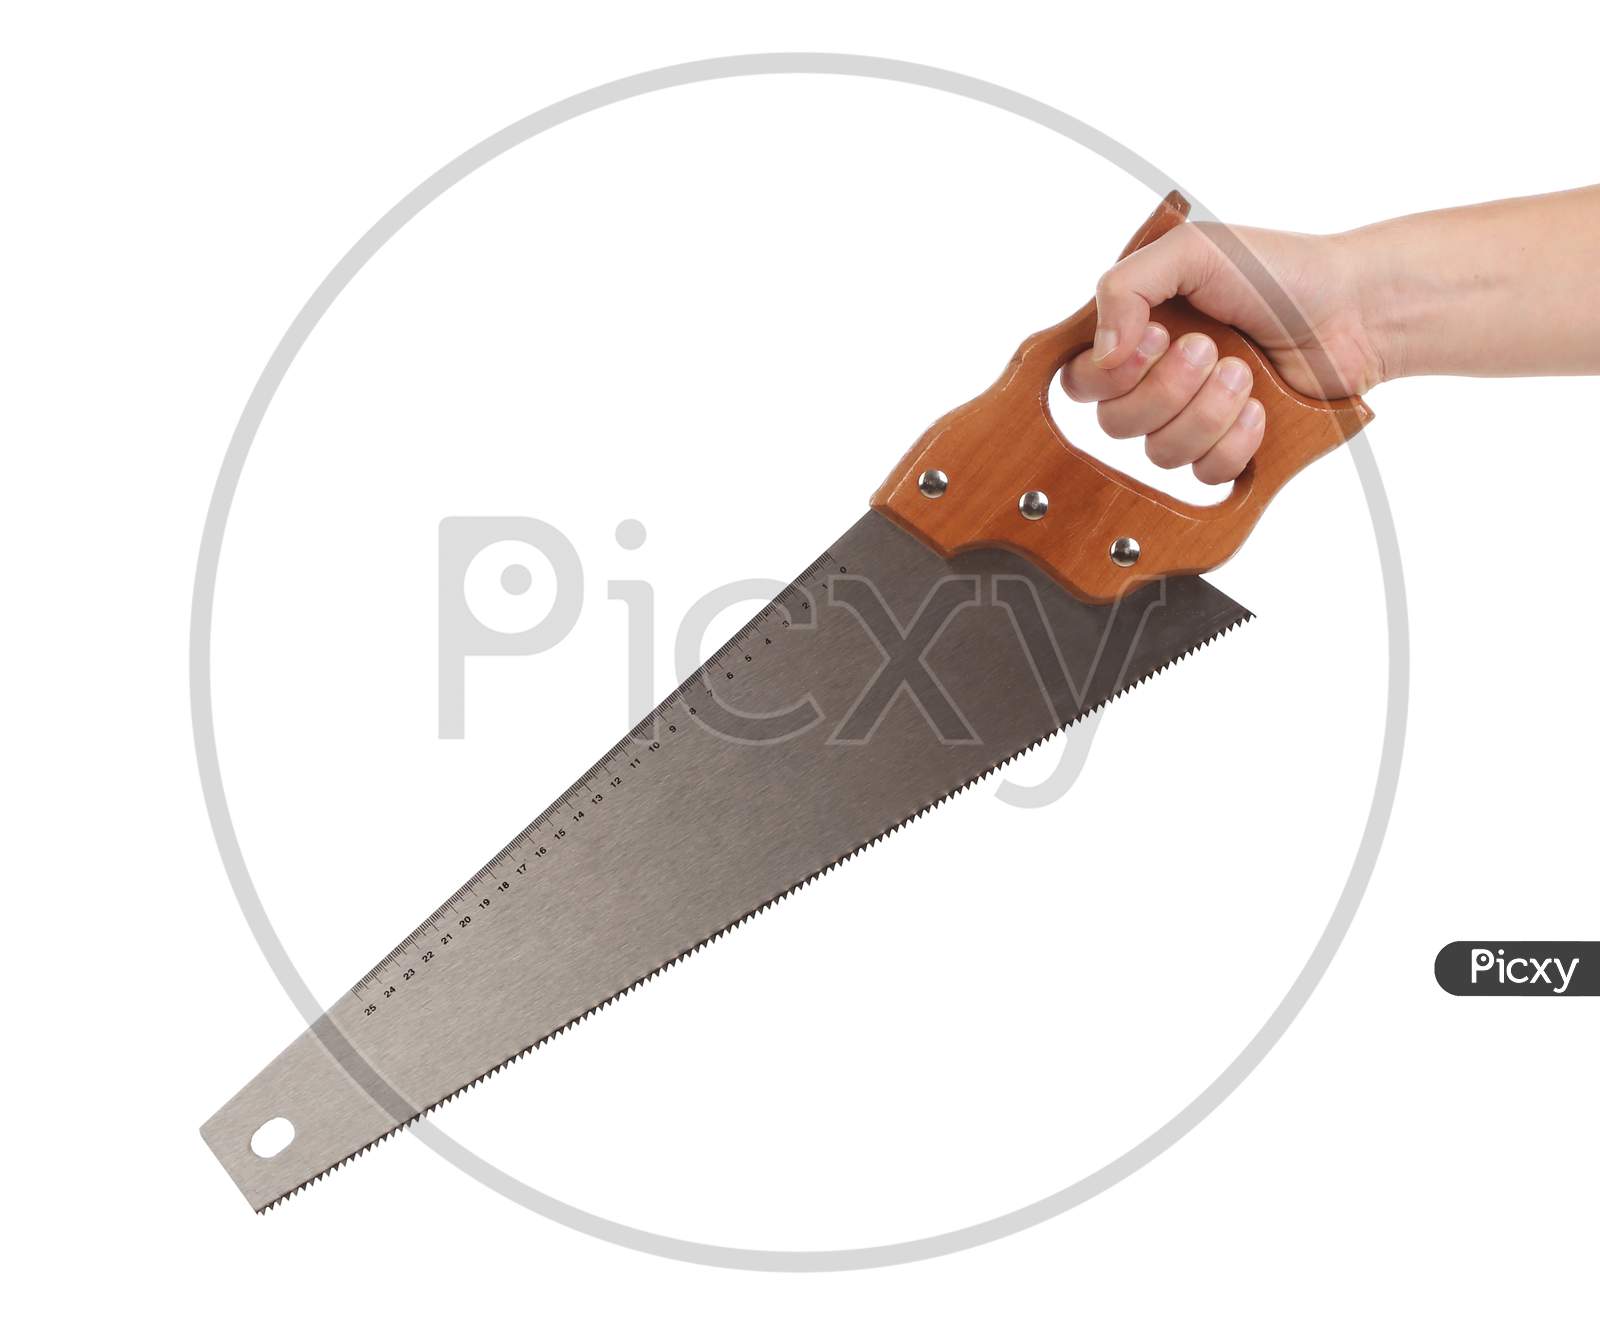 Metal Saw In Hand. Isolated On A White Background.